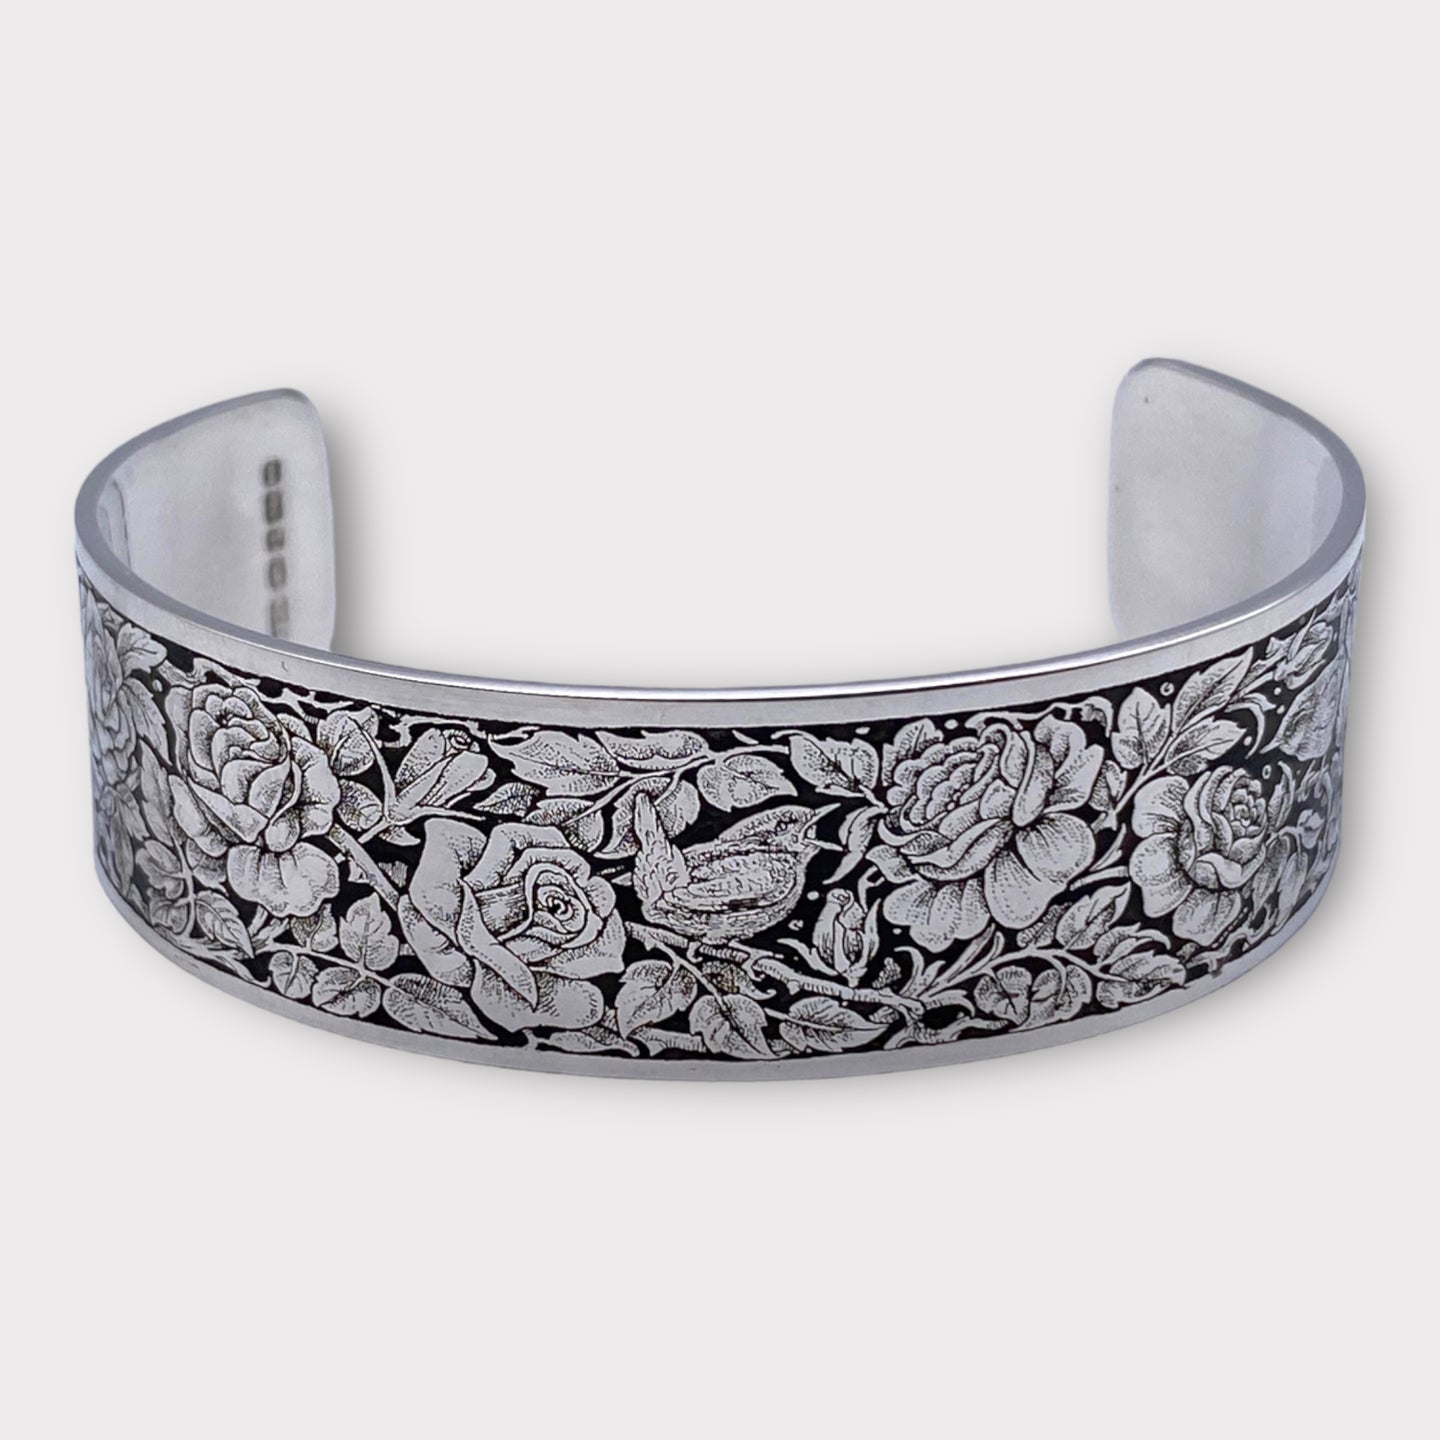 Engraved sterling silver cuff bracelet for her with english rose engraving designed by Ken Hunt